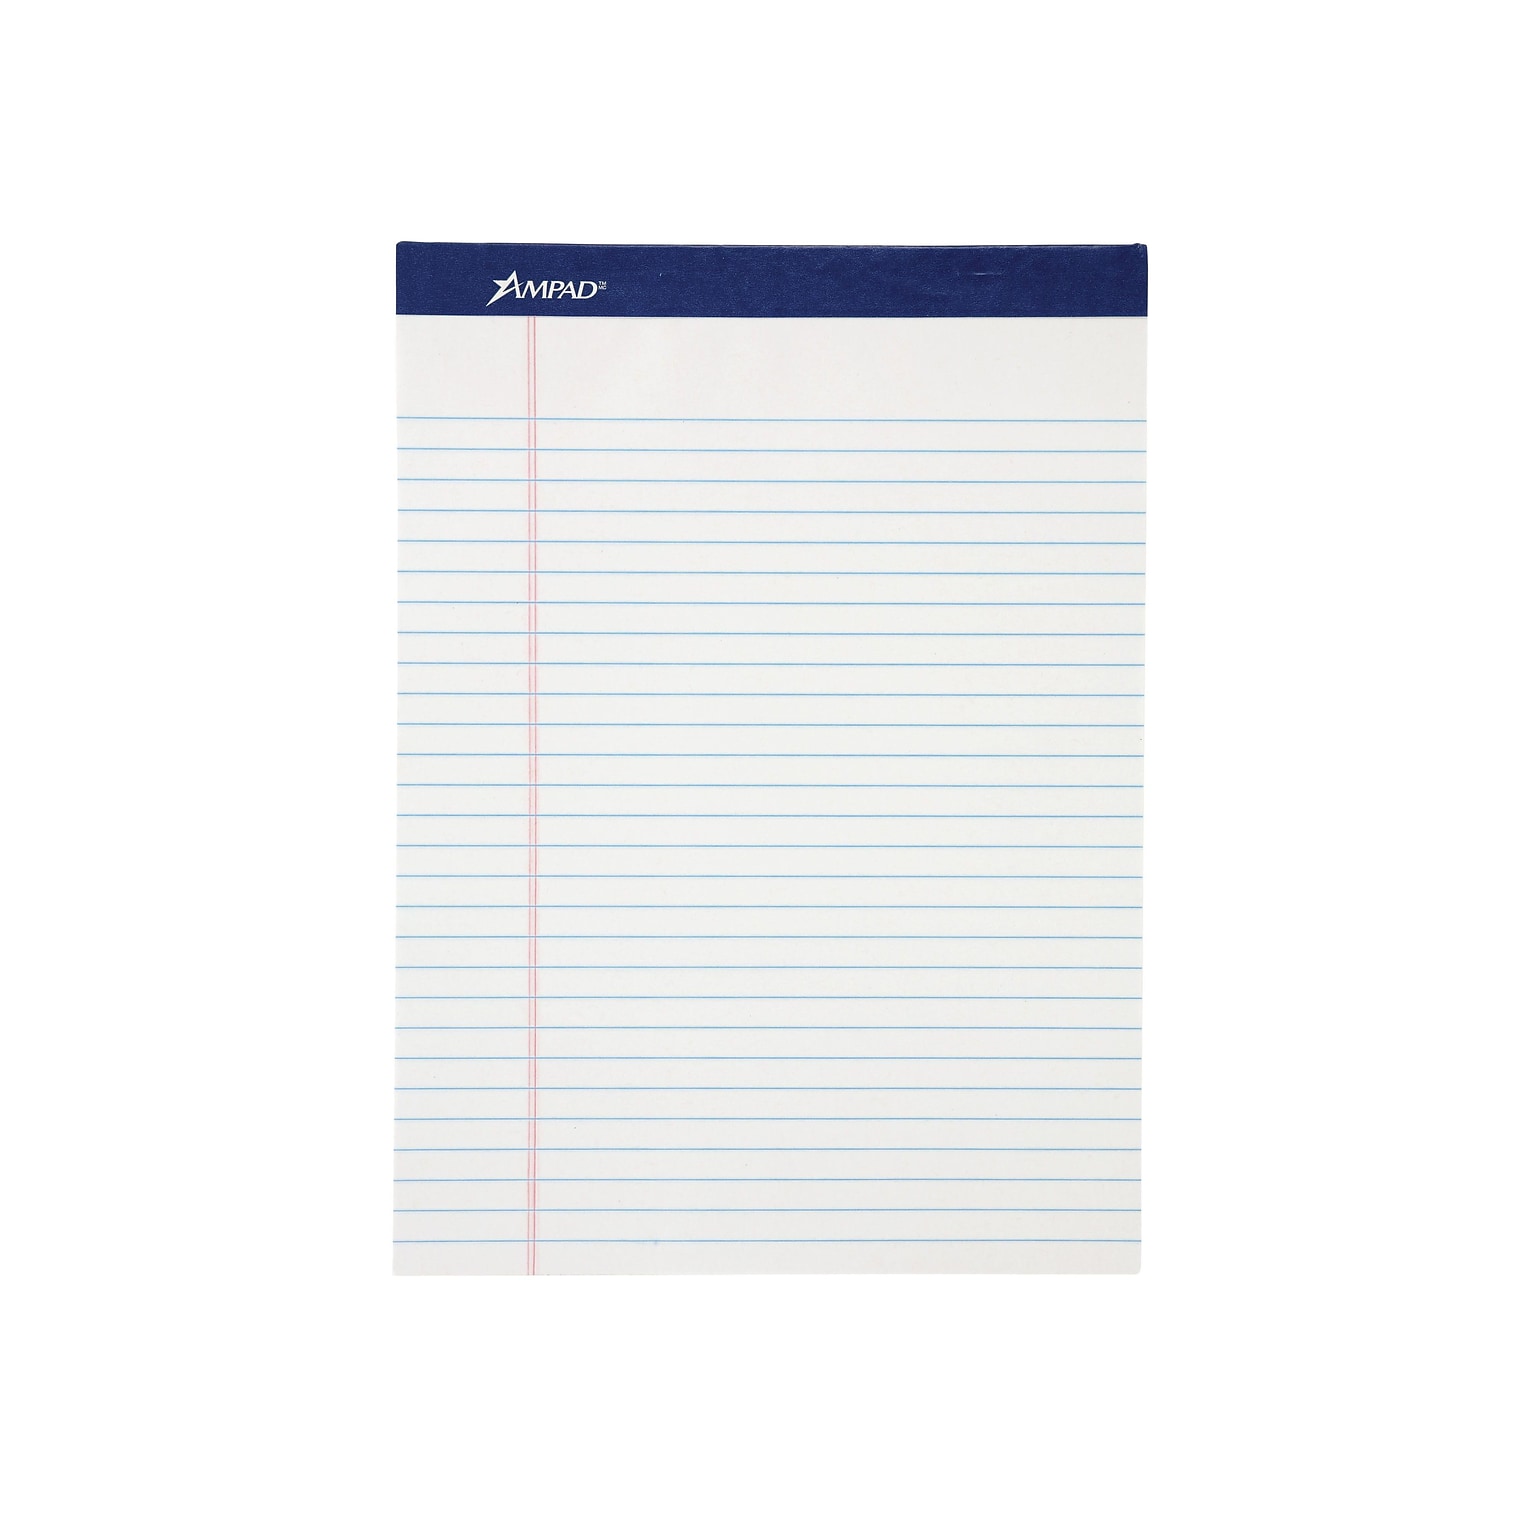 Ampad Evidence Notepad, 8.5 x 11.75, Wide Ruled, White, 50 Sheets/Pad, 12 Pads/Pack (TOP20-170)